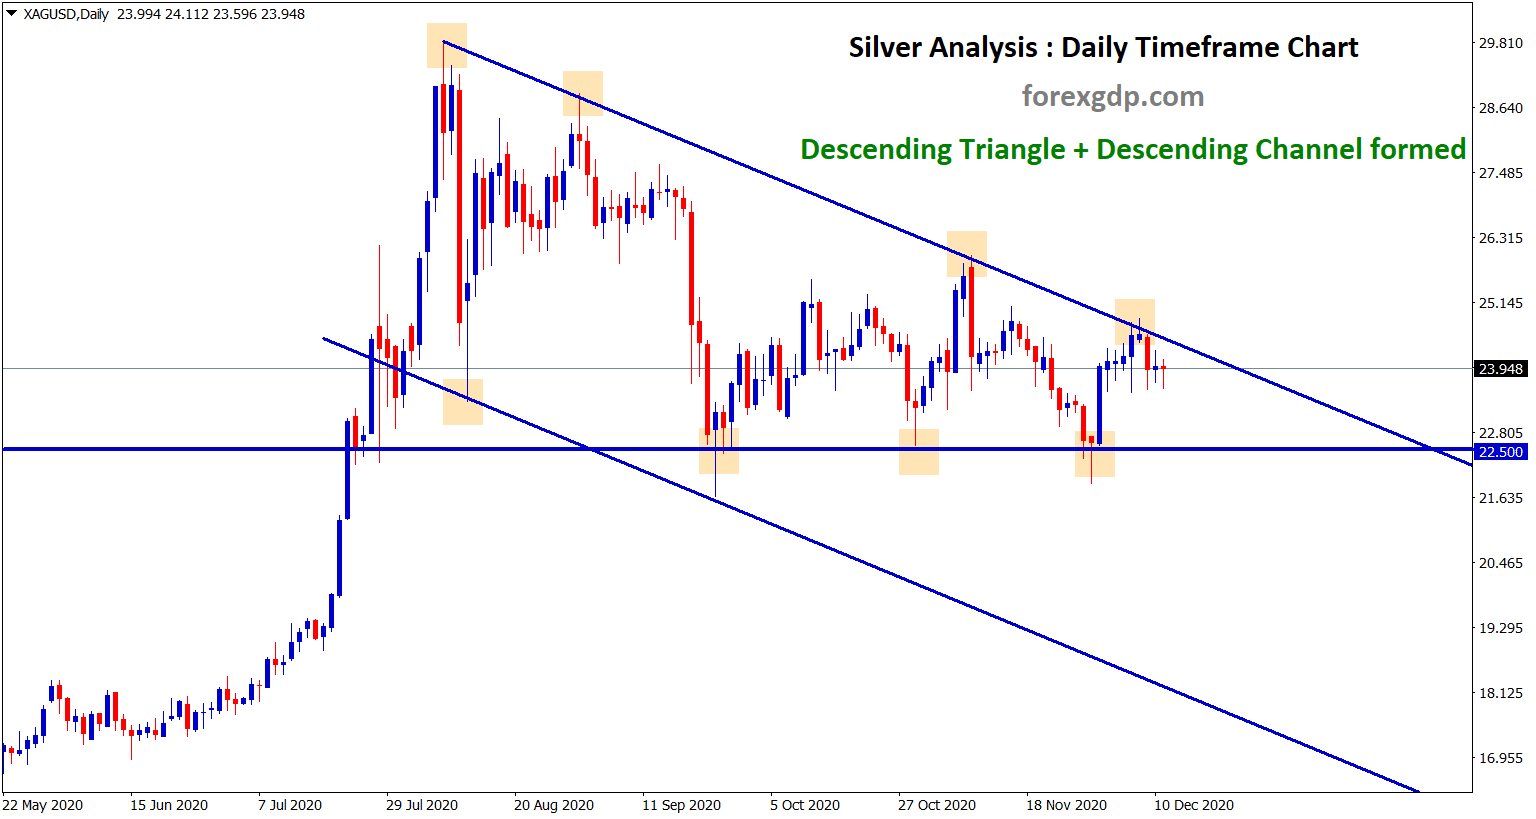 descending channel and triangle formed in silver price chart